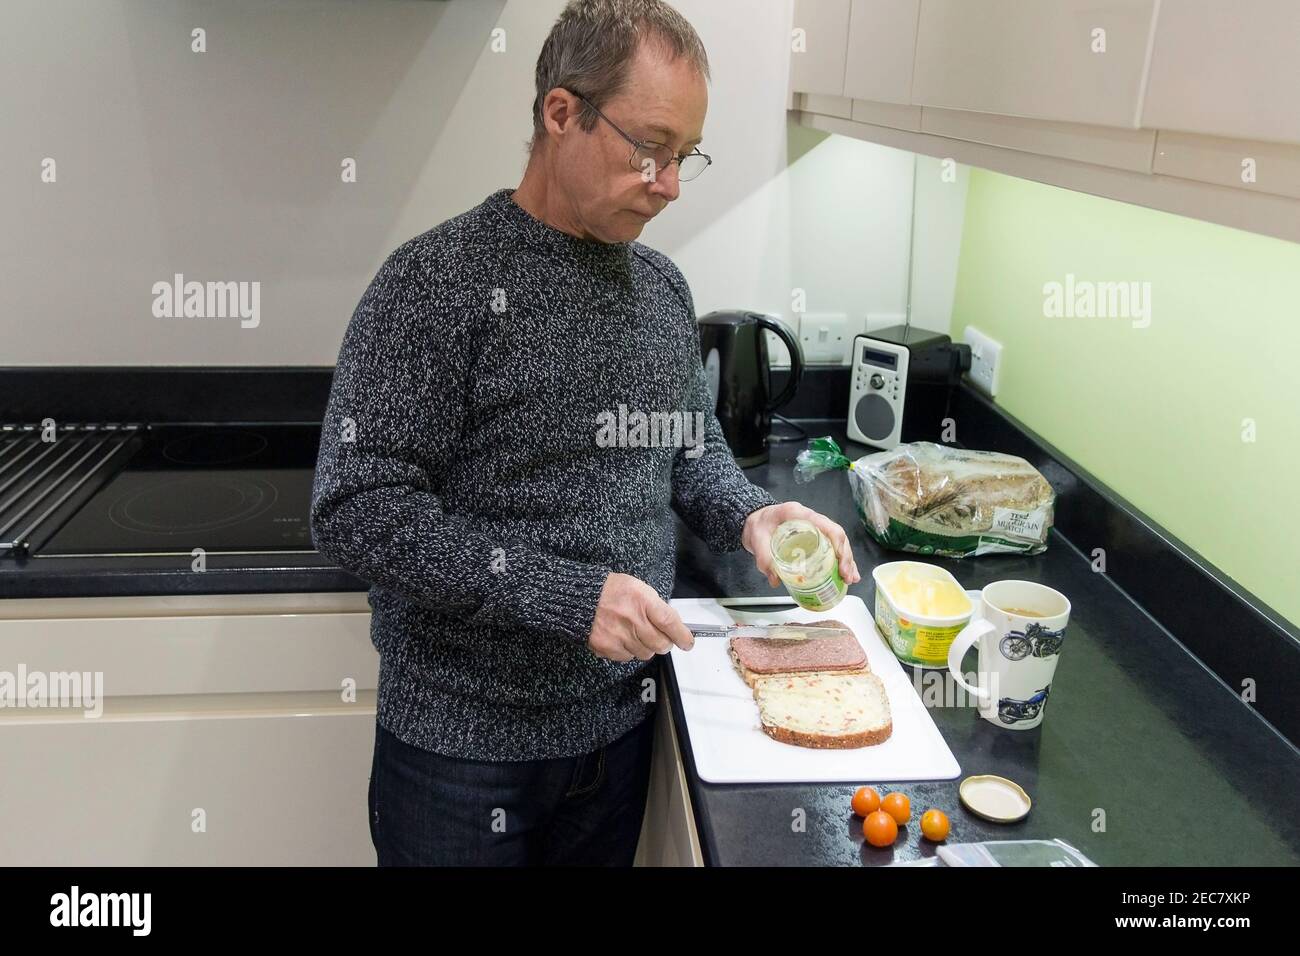 Sandwich making pensioner male making a corned beef and tomato sandwich at home in the kitchen during lock down 2020. One self image of seven taken. Stock Photo